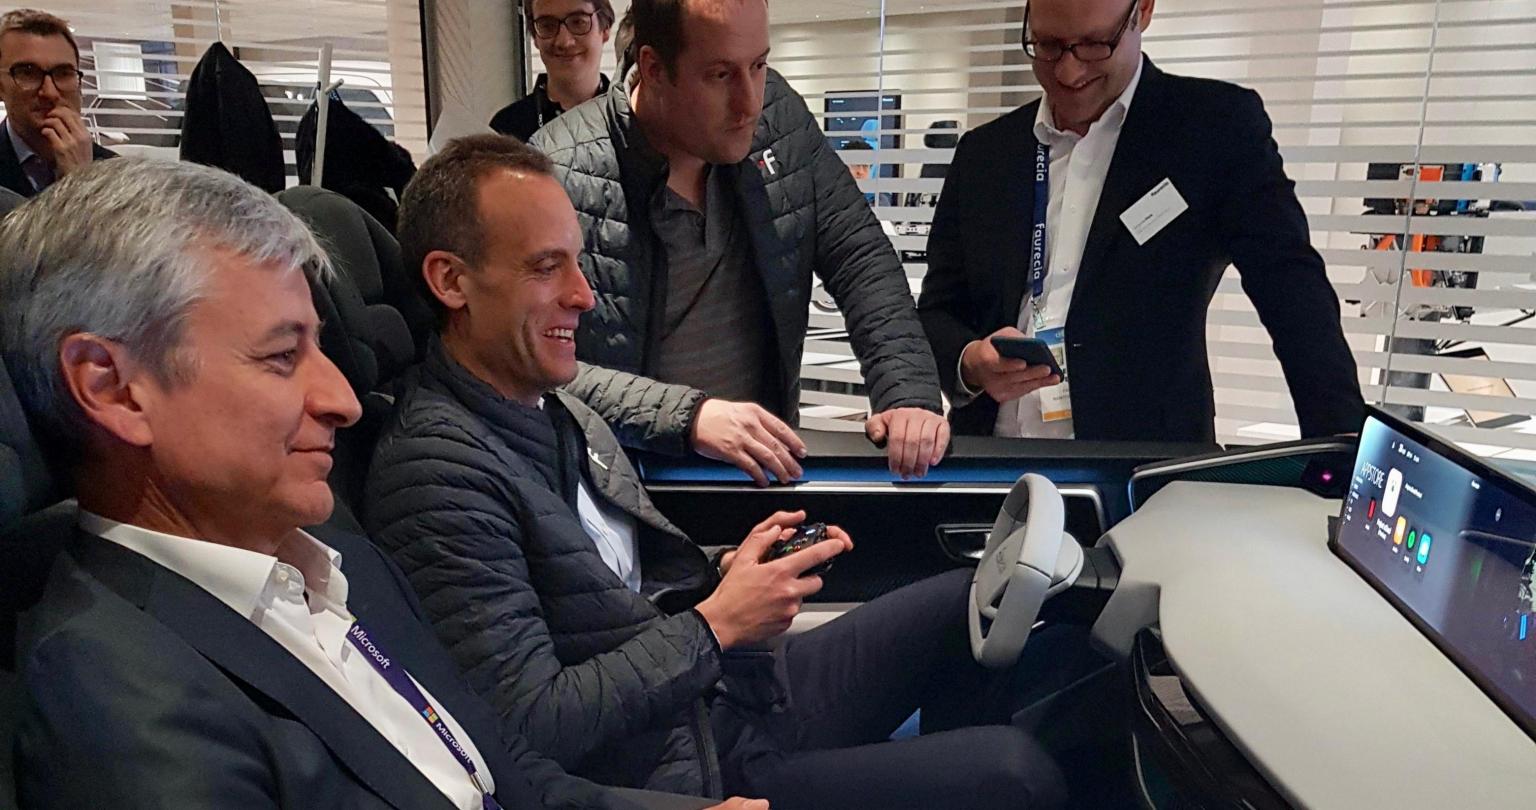 Jean-Philippe Courtois, Microsoft executive vice president, and president of Global Sales, Marketing and Operations, experiences Faurecia’s cockpit demo at CES 2020.